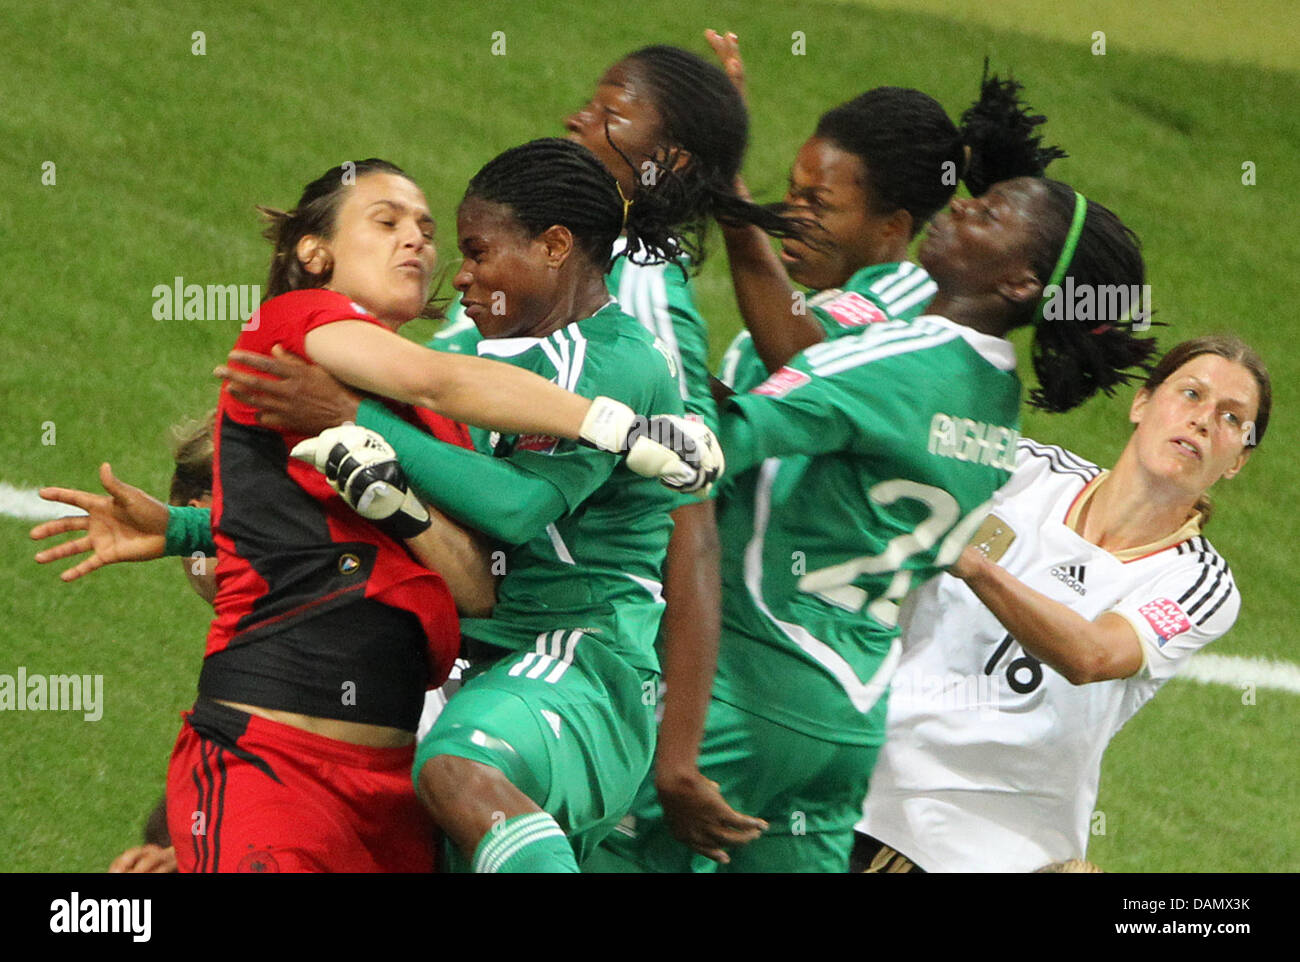 Germany's goalkeeper Nadine Angerer clashes with Nigerian players during the Group A match Germany against Nigeria of FIFA Women's World Cup soccer tournament at the FIFA Women's World Cup Stadium in Frankfurt, Germany, 30 June 2011. Foto: Roland Holschneider dpa/lhe  +++(c) dpa - Bildfunk+++ Stock Photo